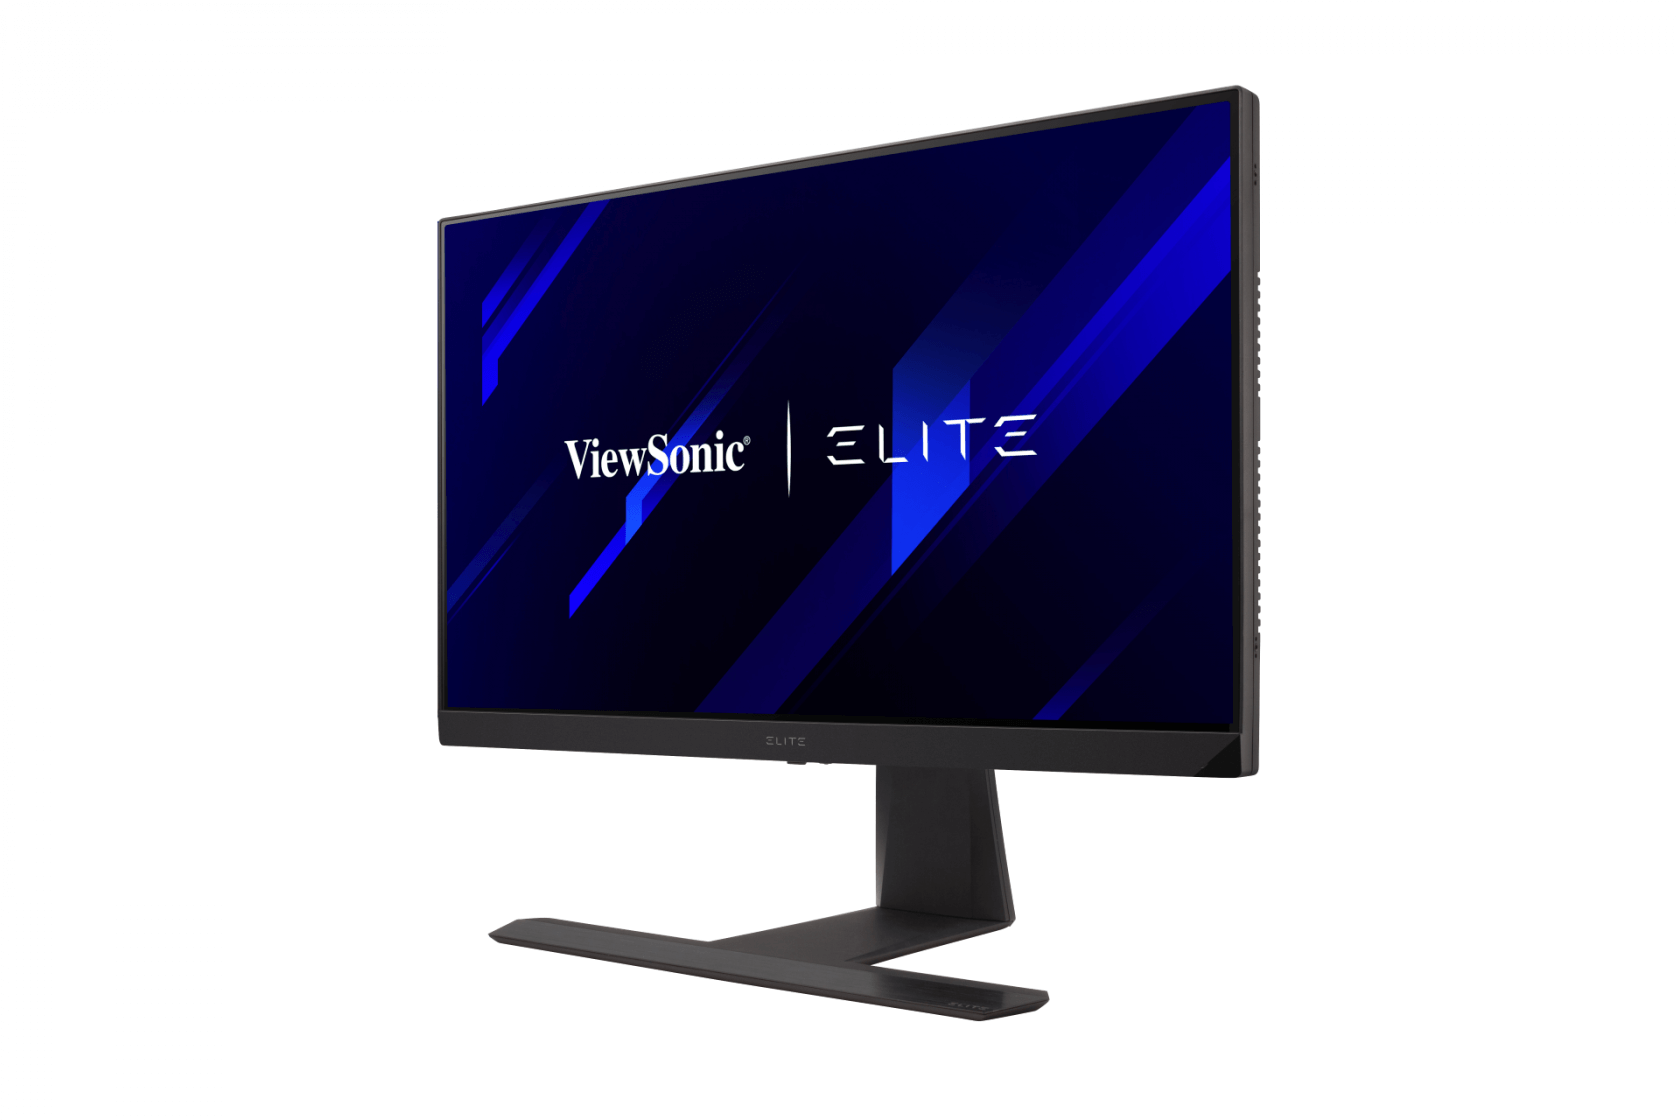 ViewSonic's 240Hz XG270 gaming monitor receives the 'world's first' Blur Busters certification